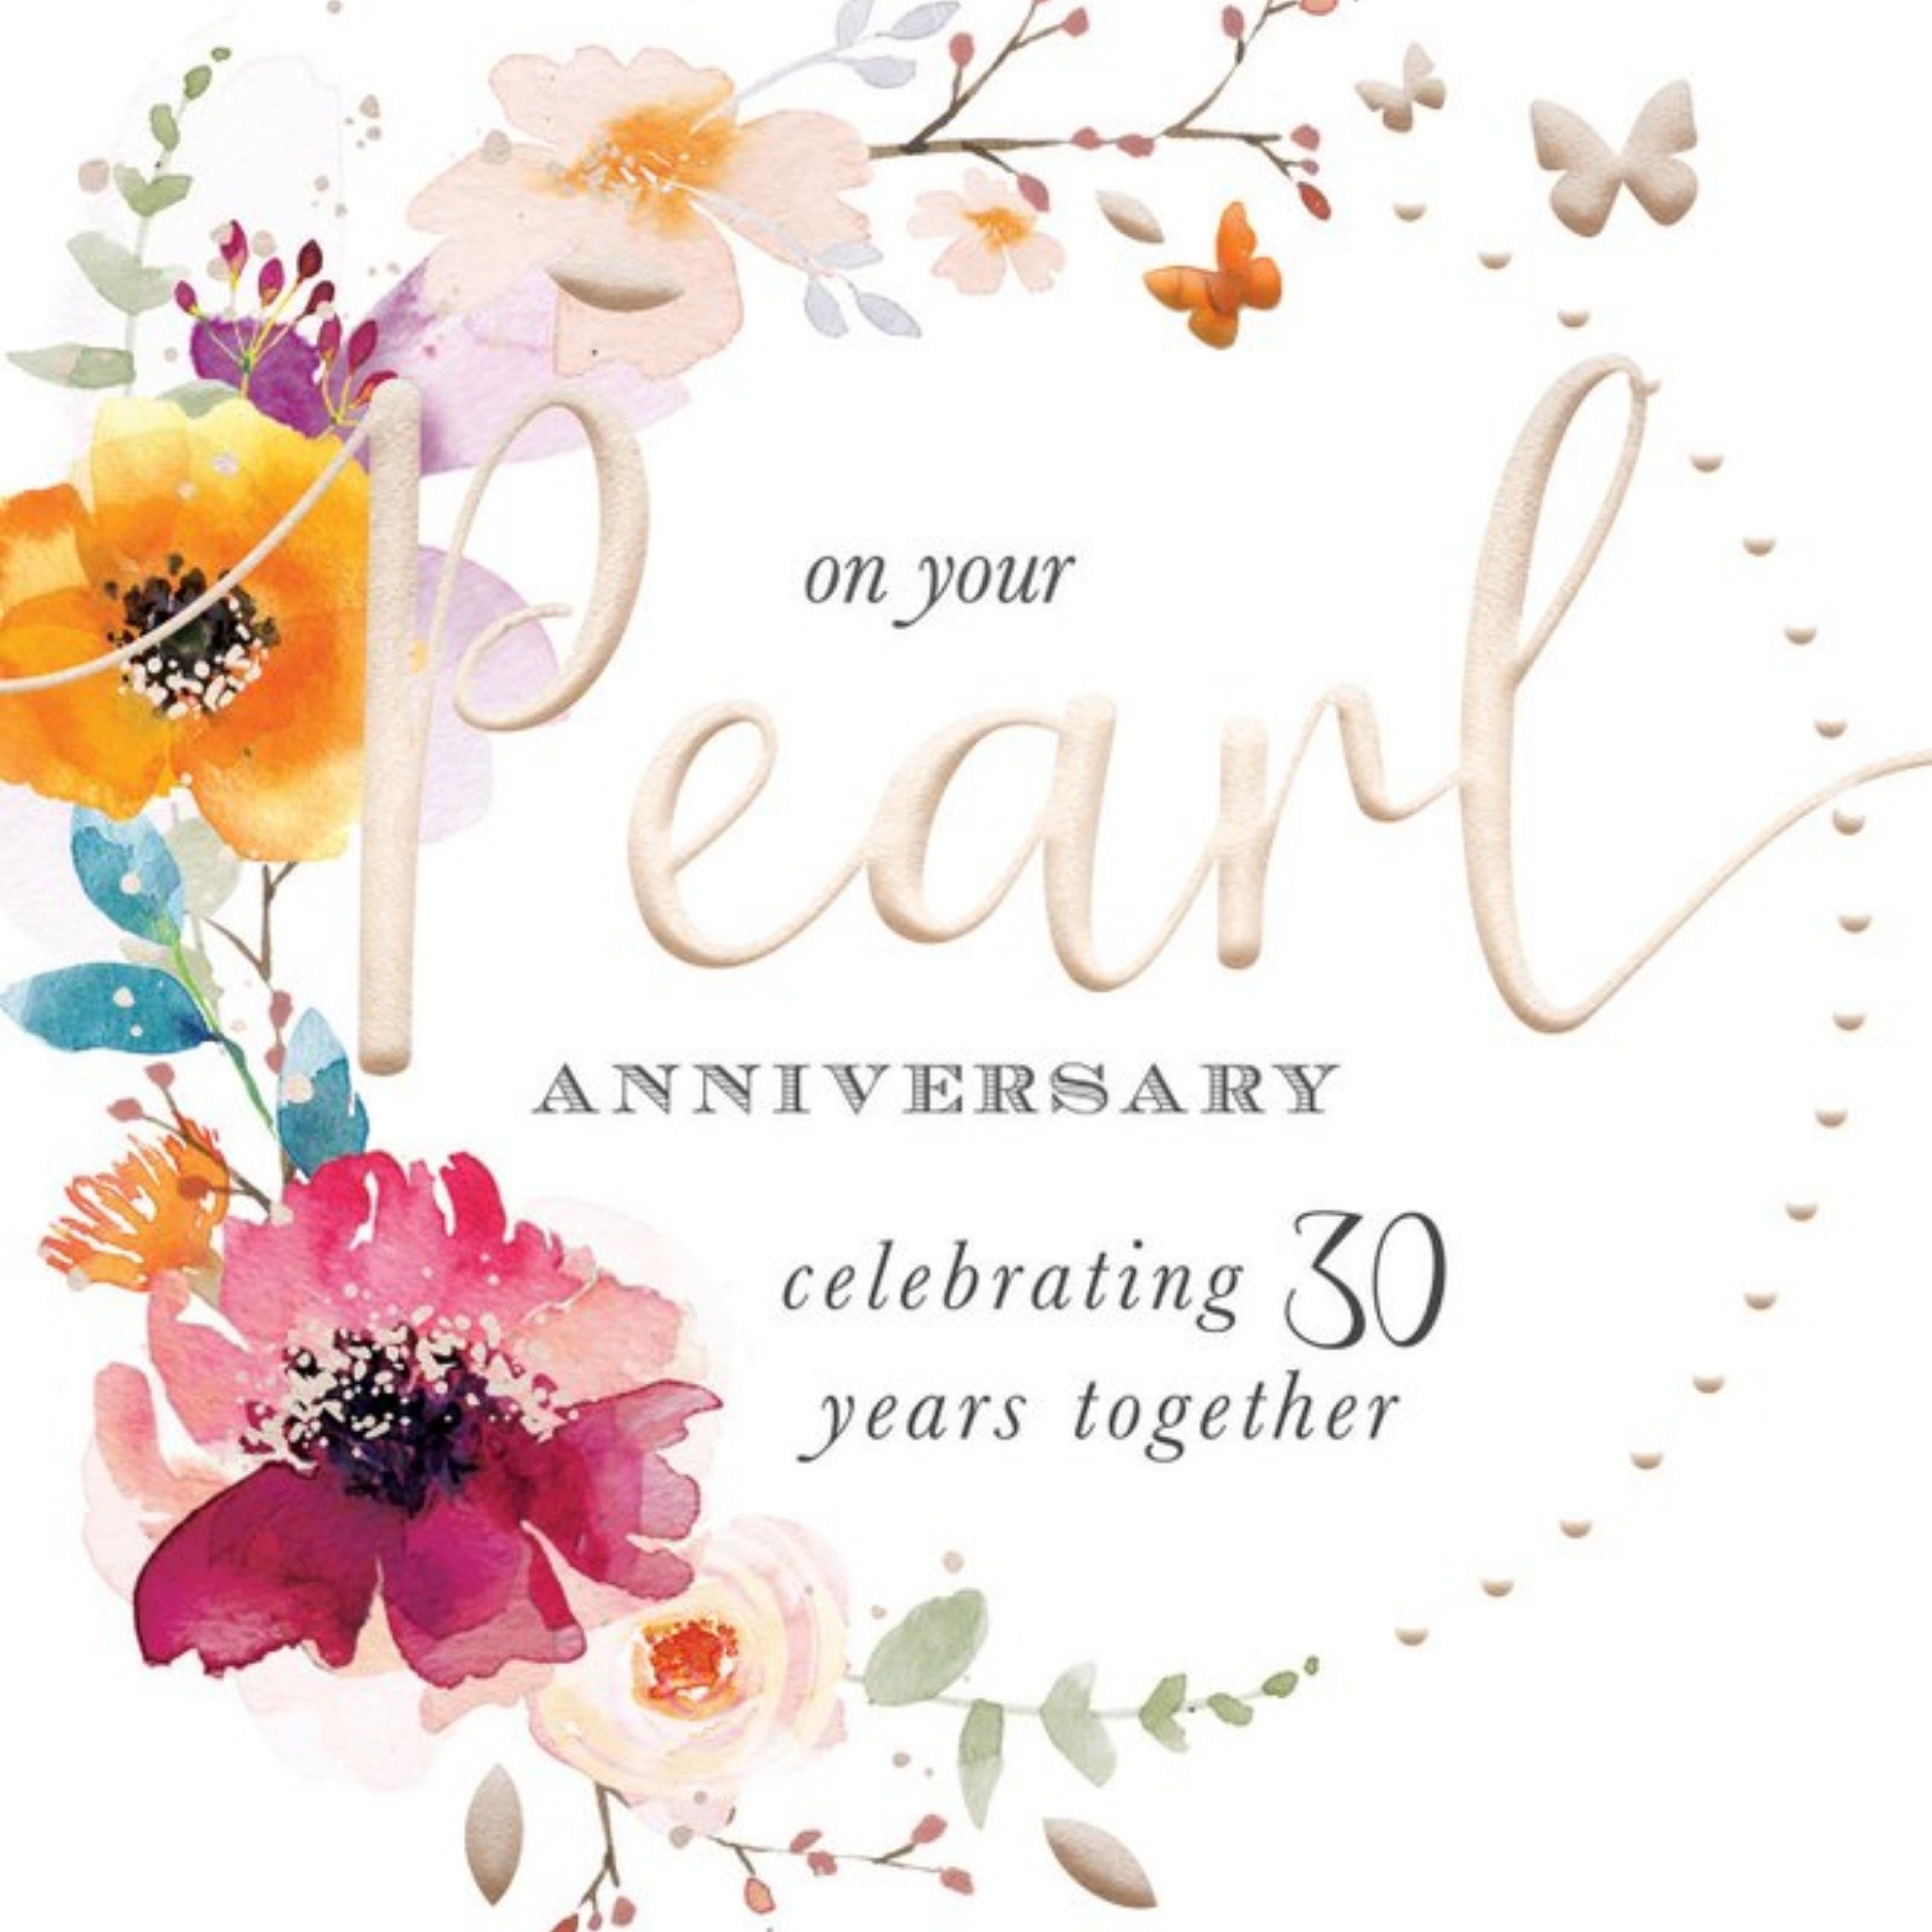 Moonpig On Your Pearl Anniversary Celebrating 30 Years Card, Large